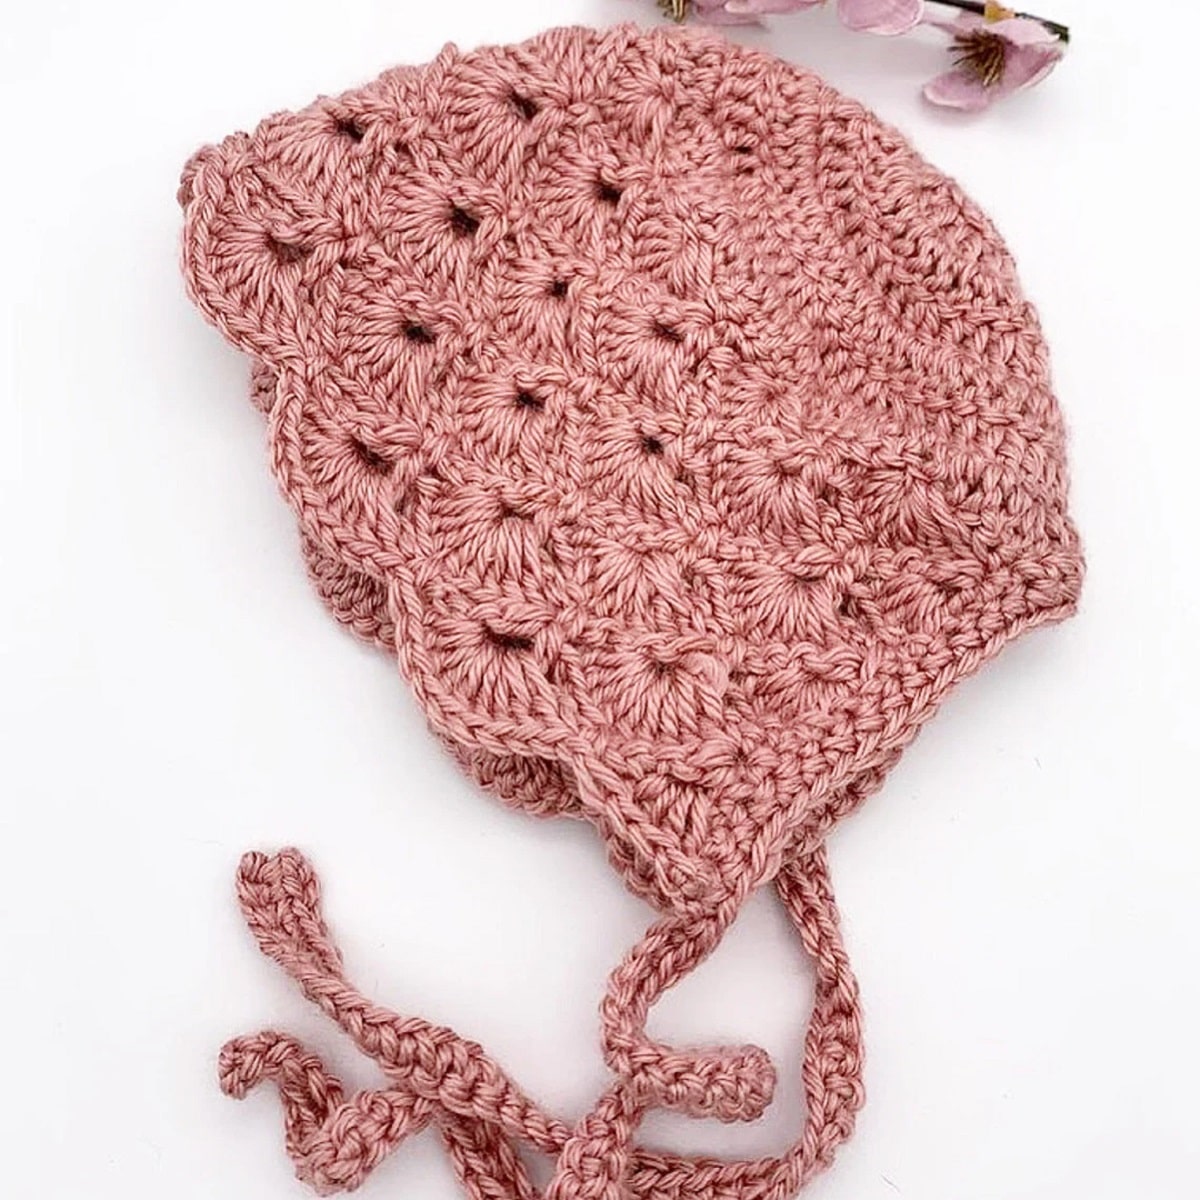 Pink crochet baby bonnet with fan like stitching and a scalloped edge with braided string to secure the bonnet on a white background.